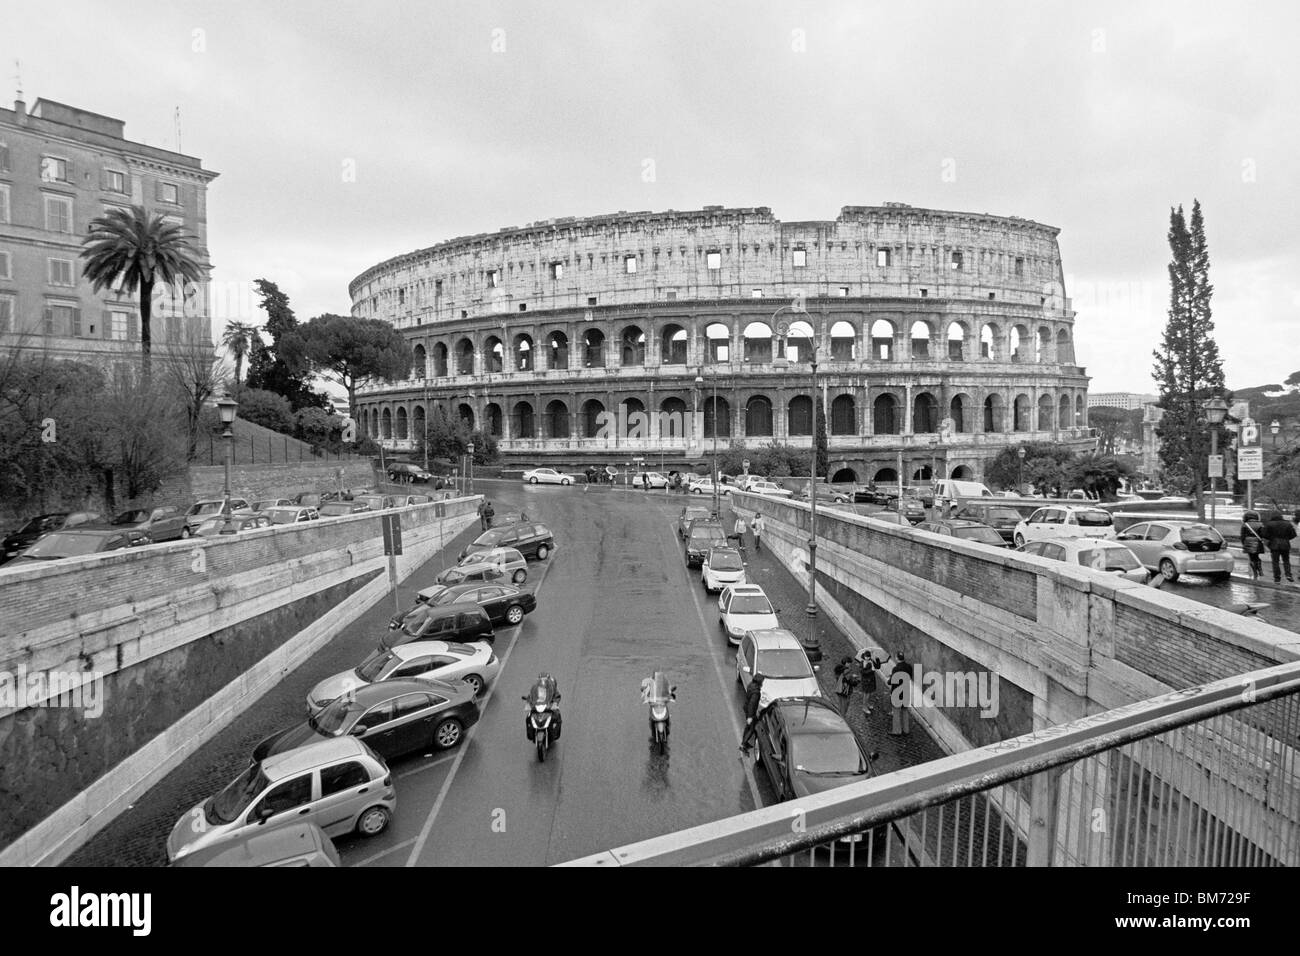 Rome, Italy, 30 January 2010 -- The colosseum, captured in black and white on Agfa APX 100 negative film, as seen from Via del F Stock Photo